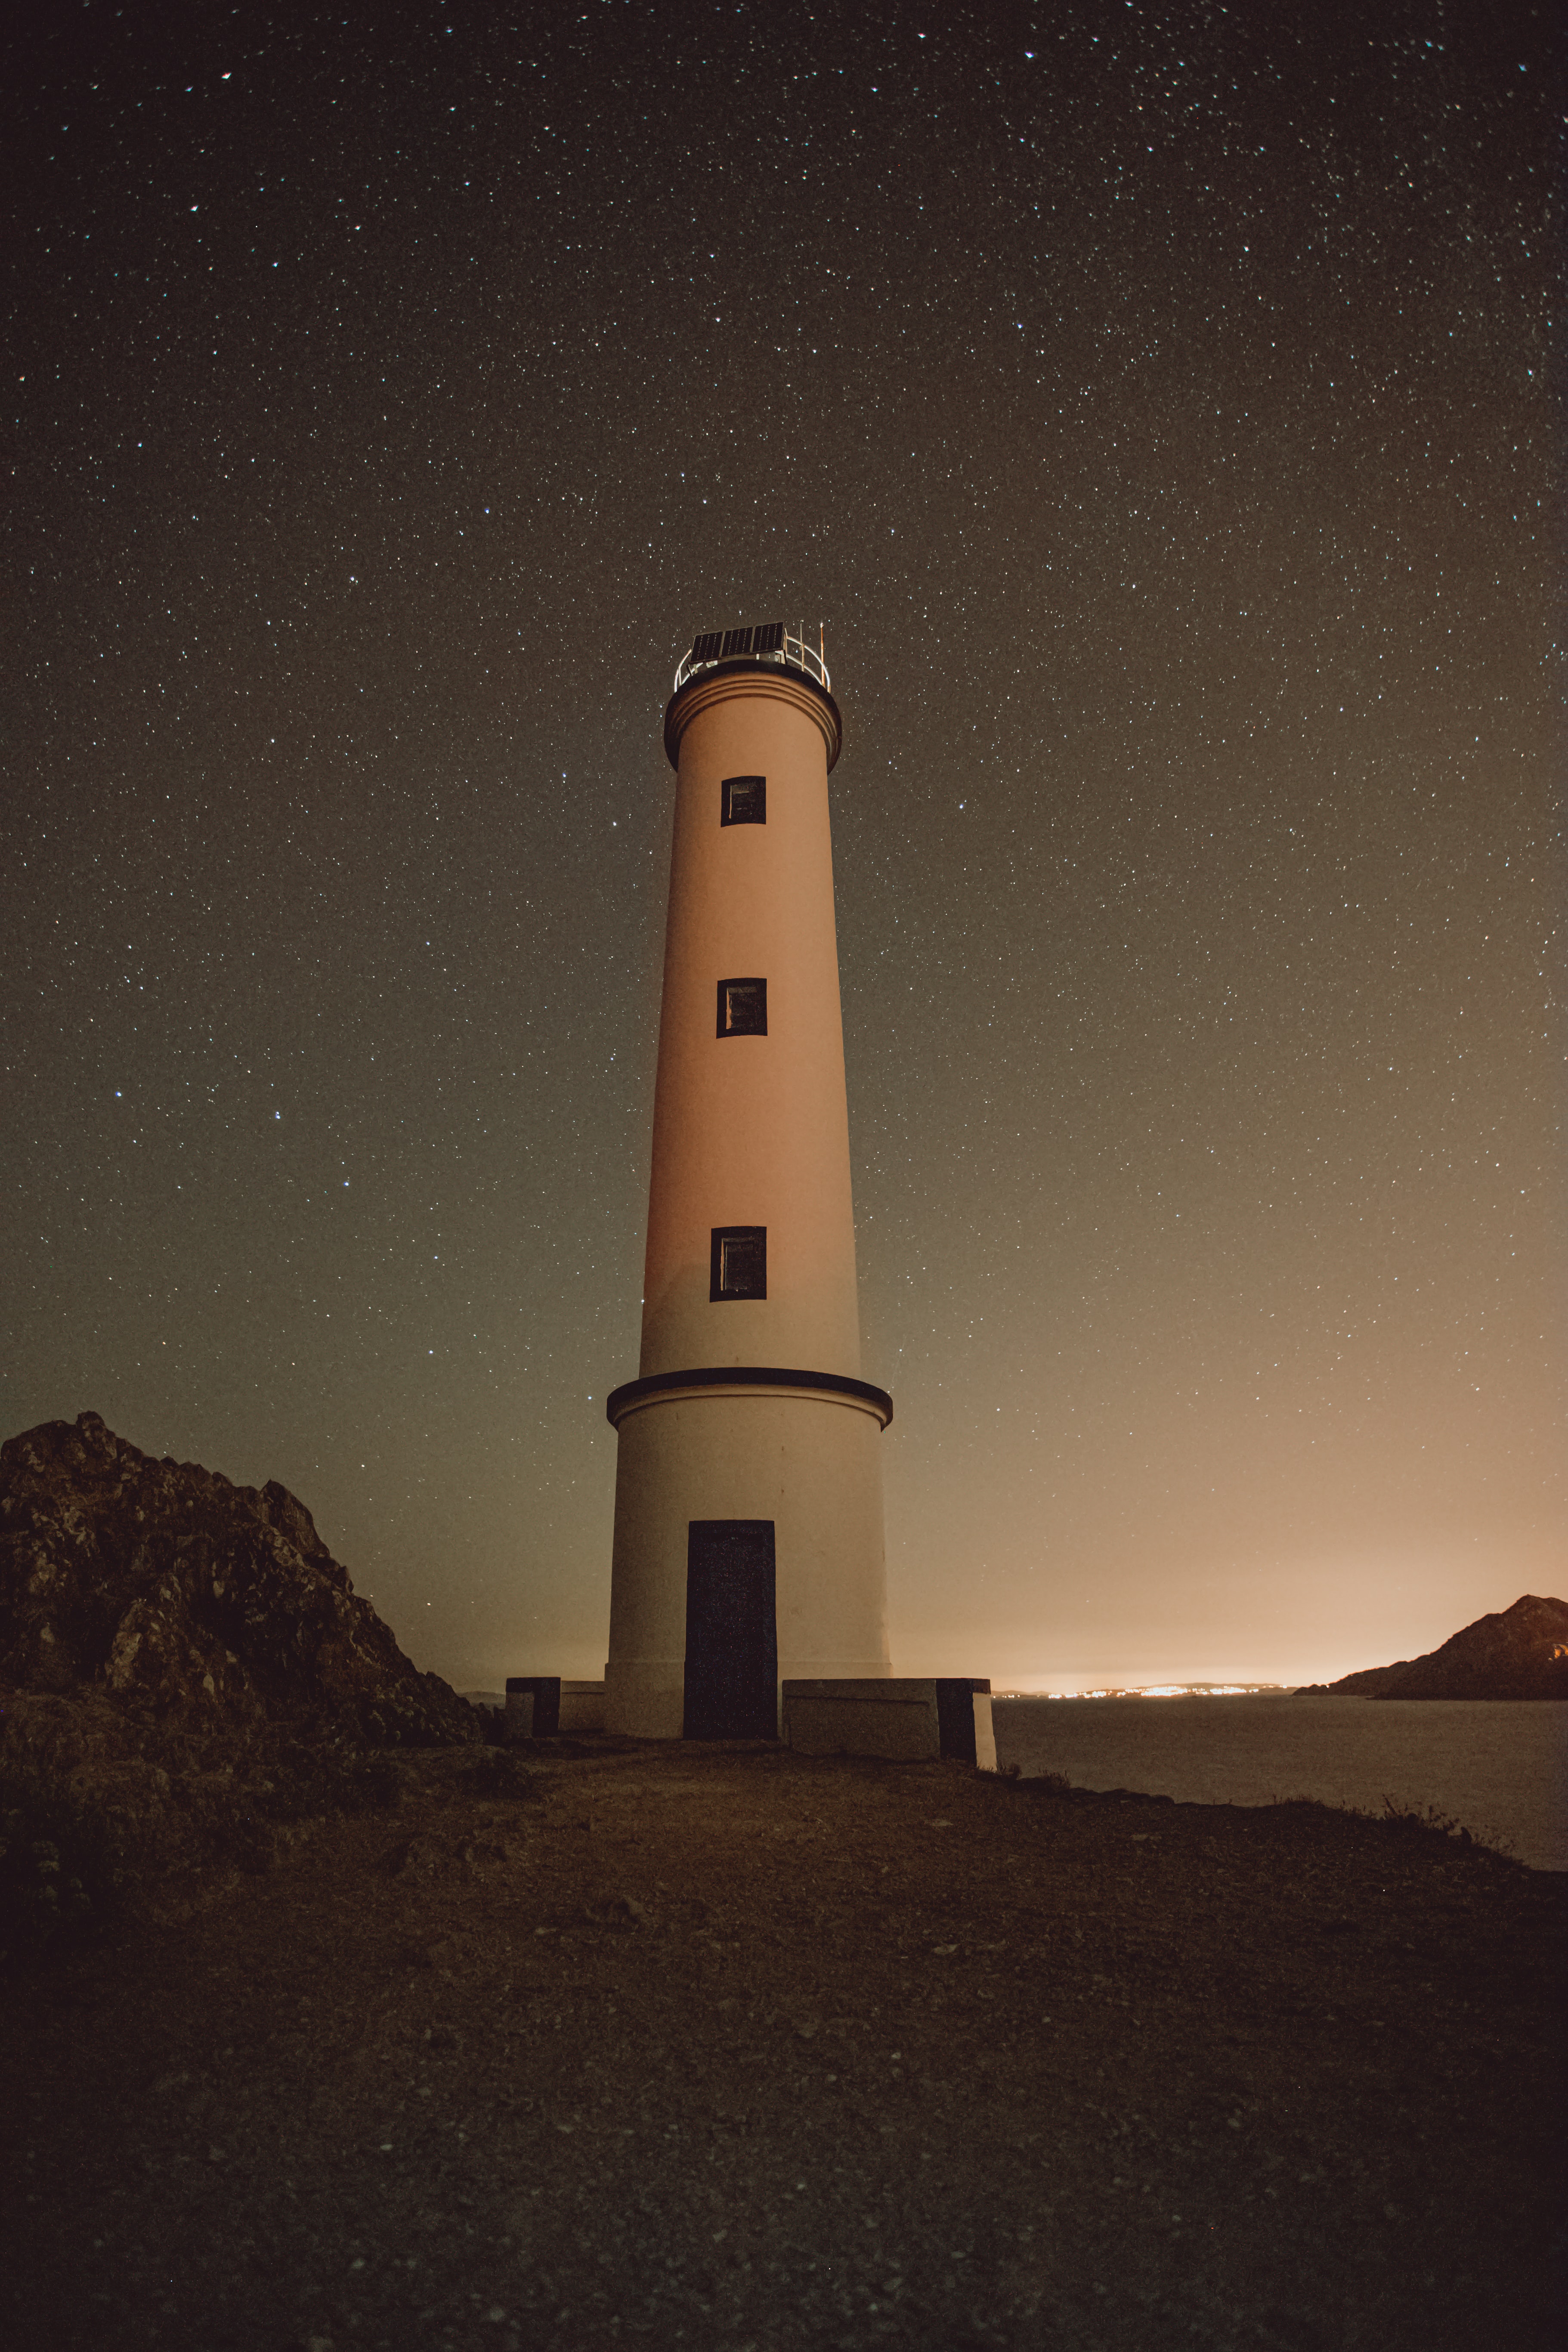 stars, nature, night, building, rocks, starry sky, lighthouse cell phone wallpapers